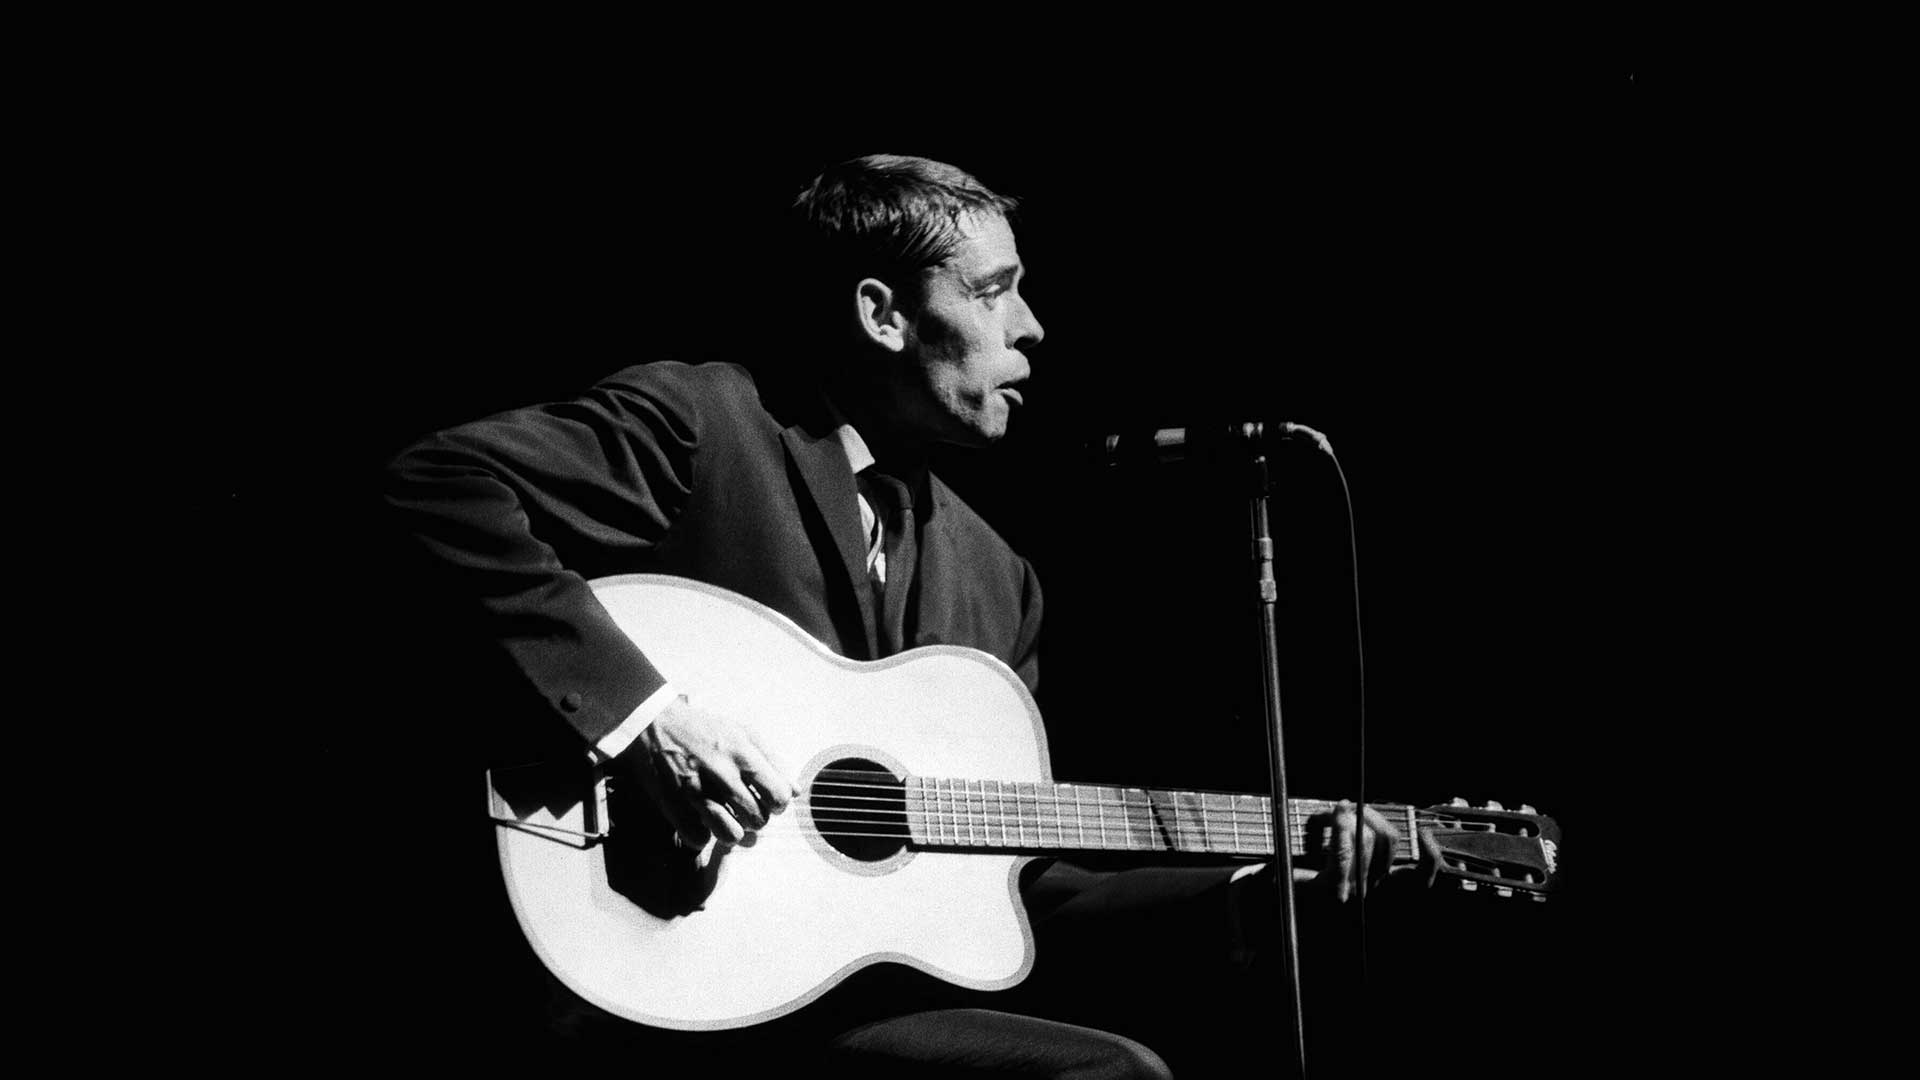 Black and white photo of Jacques Brel playing a guitar and singing into a microphone